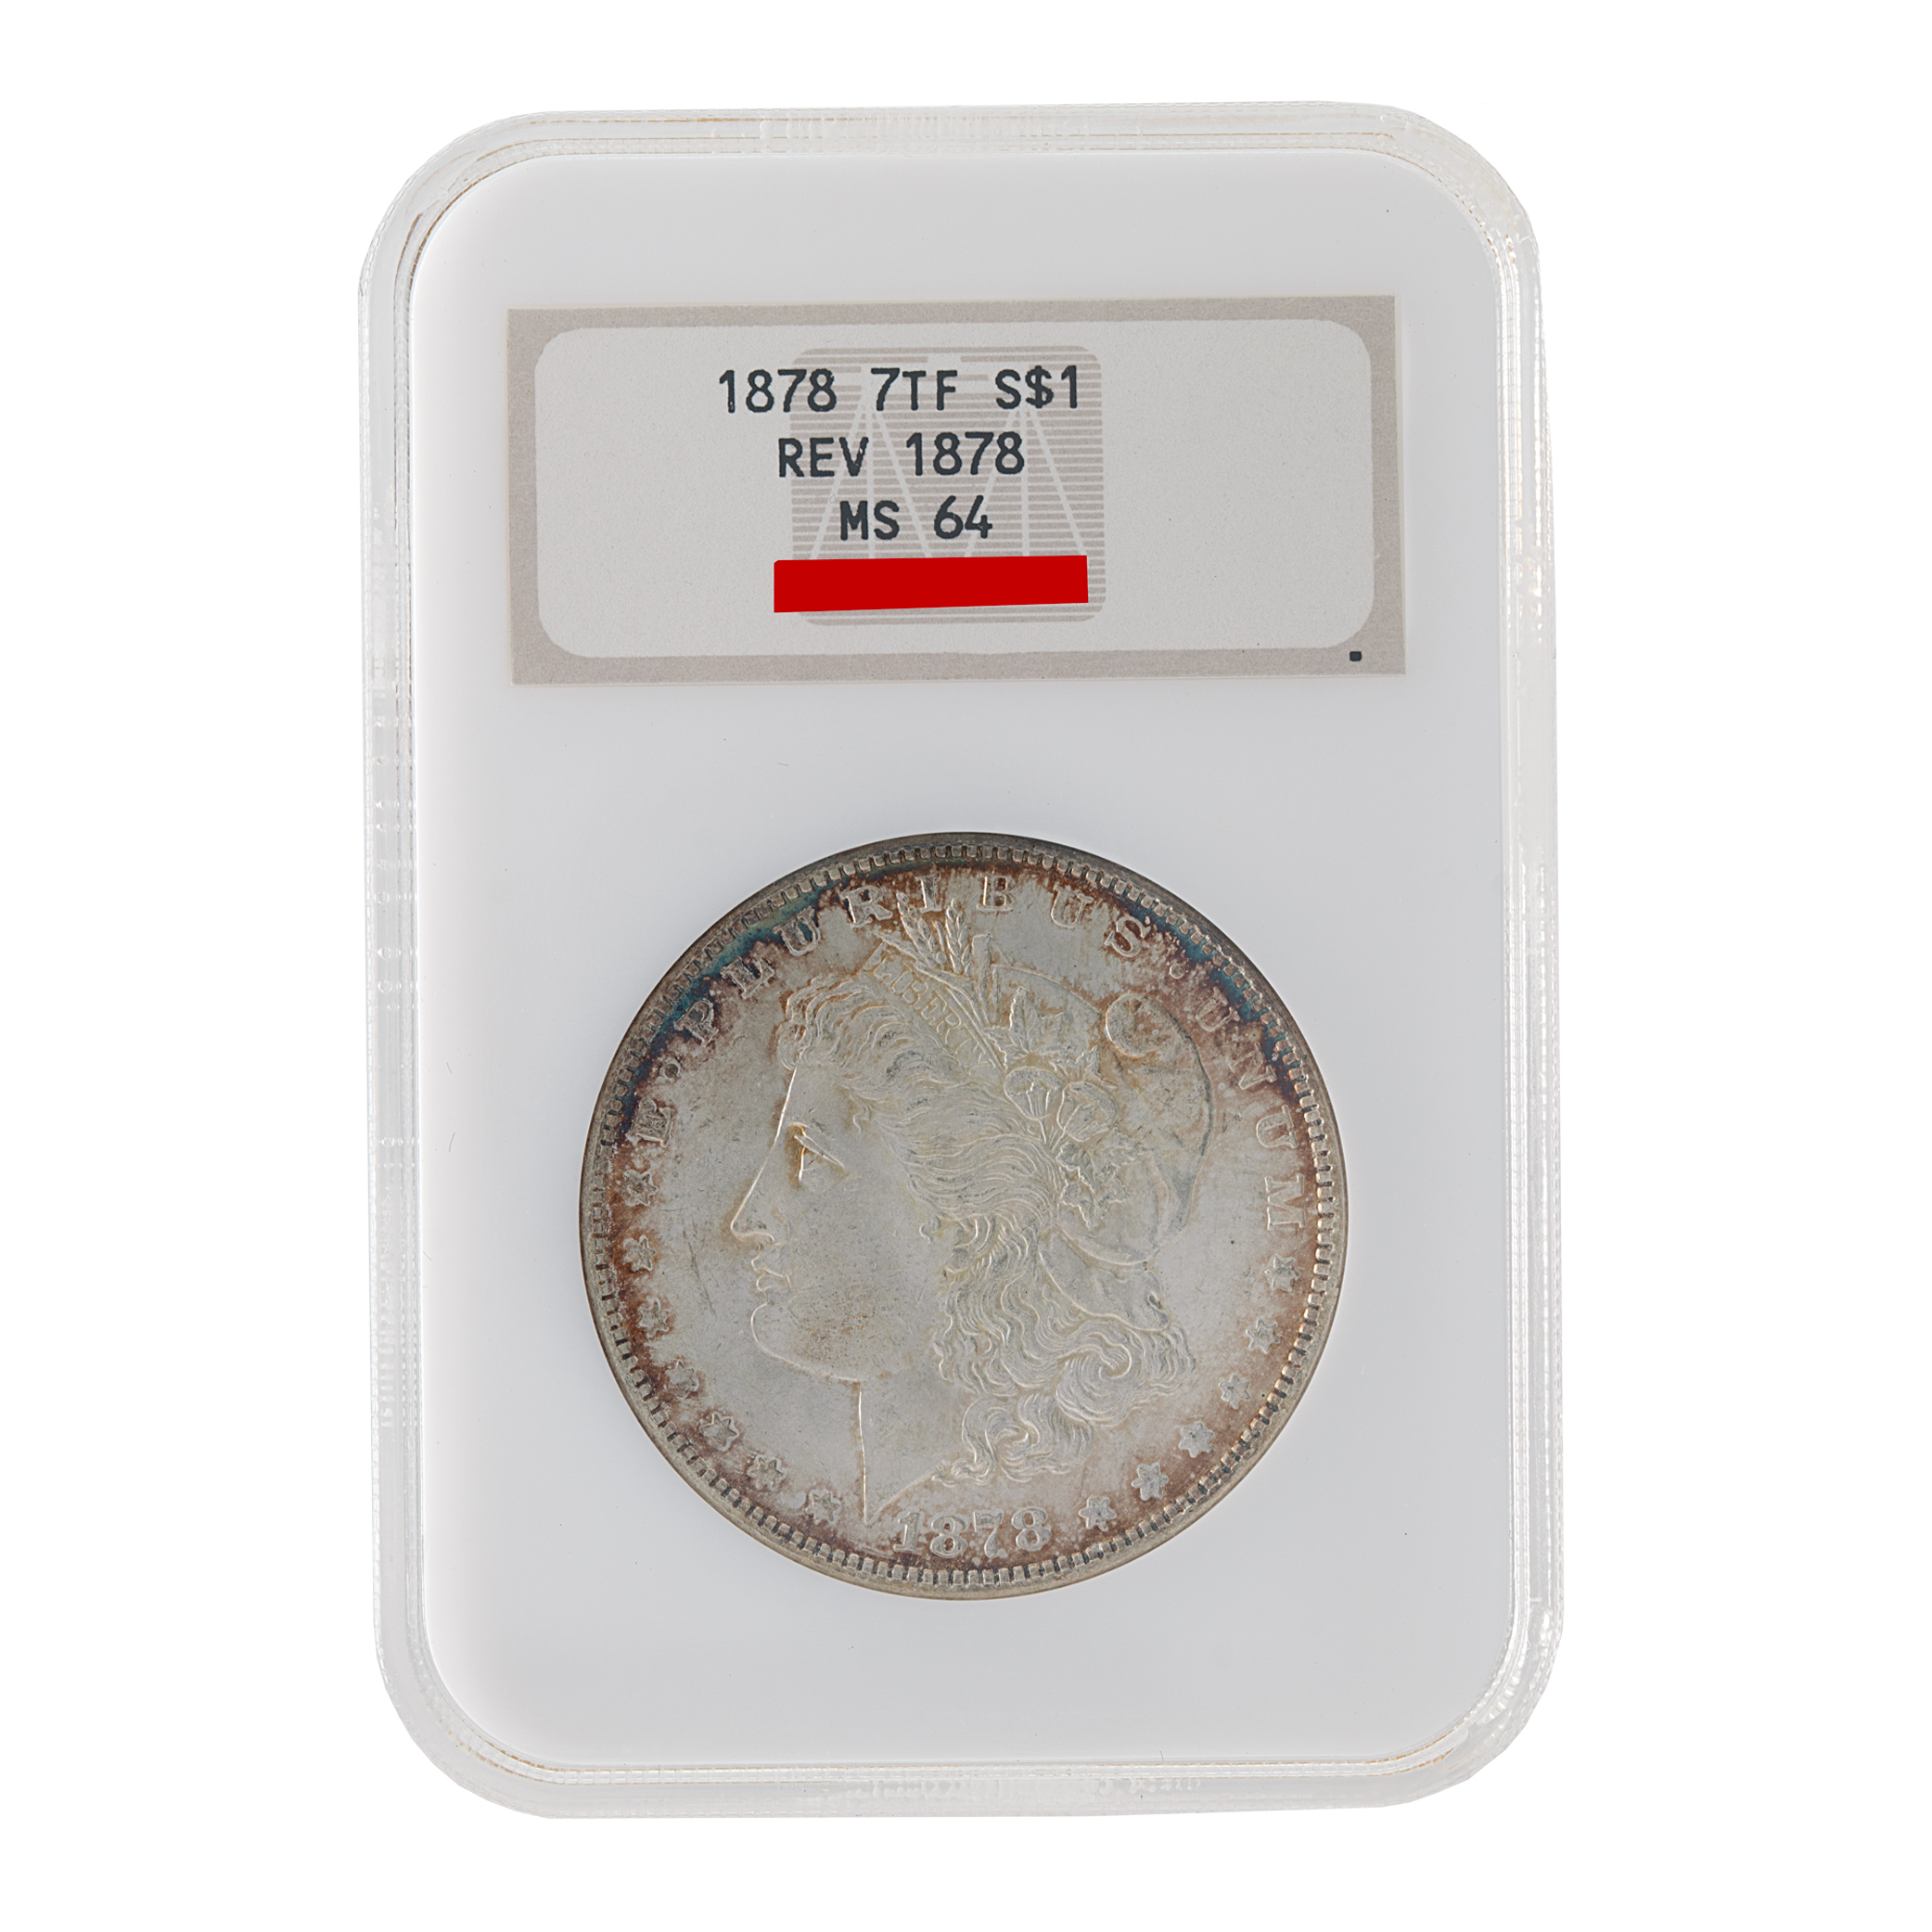 US Silver dollar coin from 1878 7TF REV78. NGC graded MS 64 (Default)